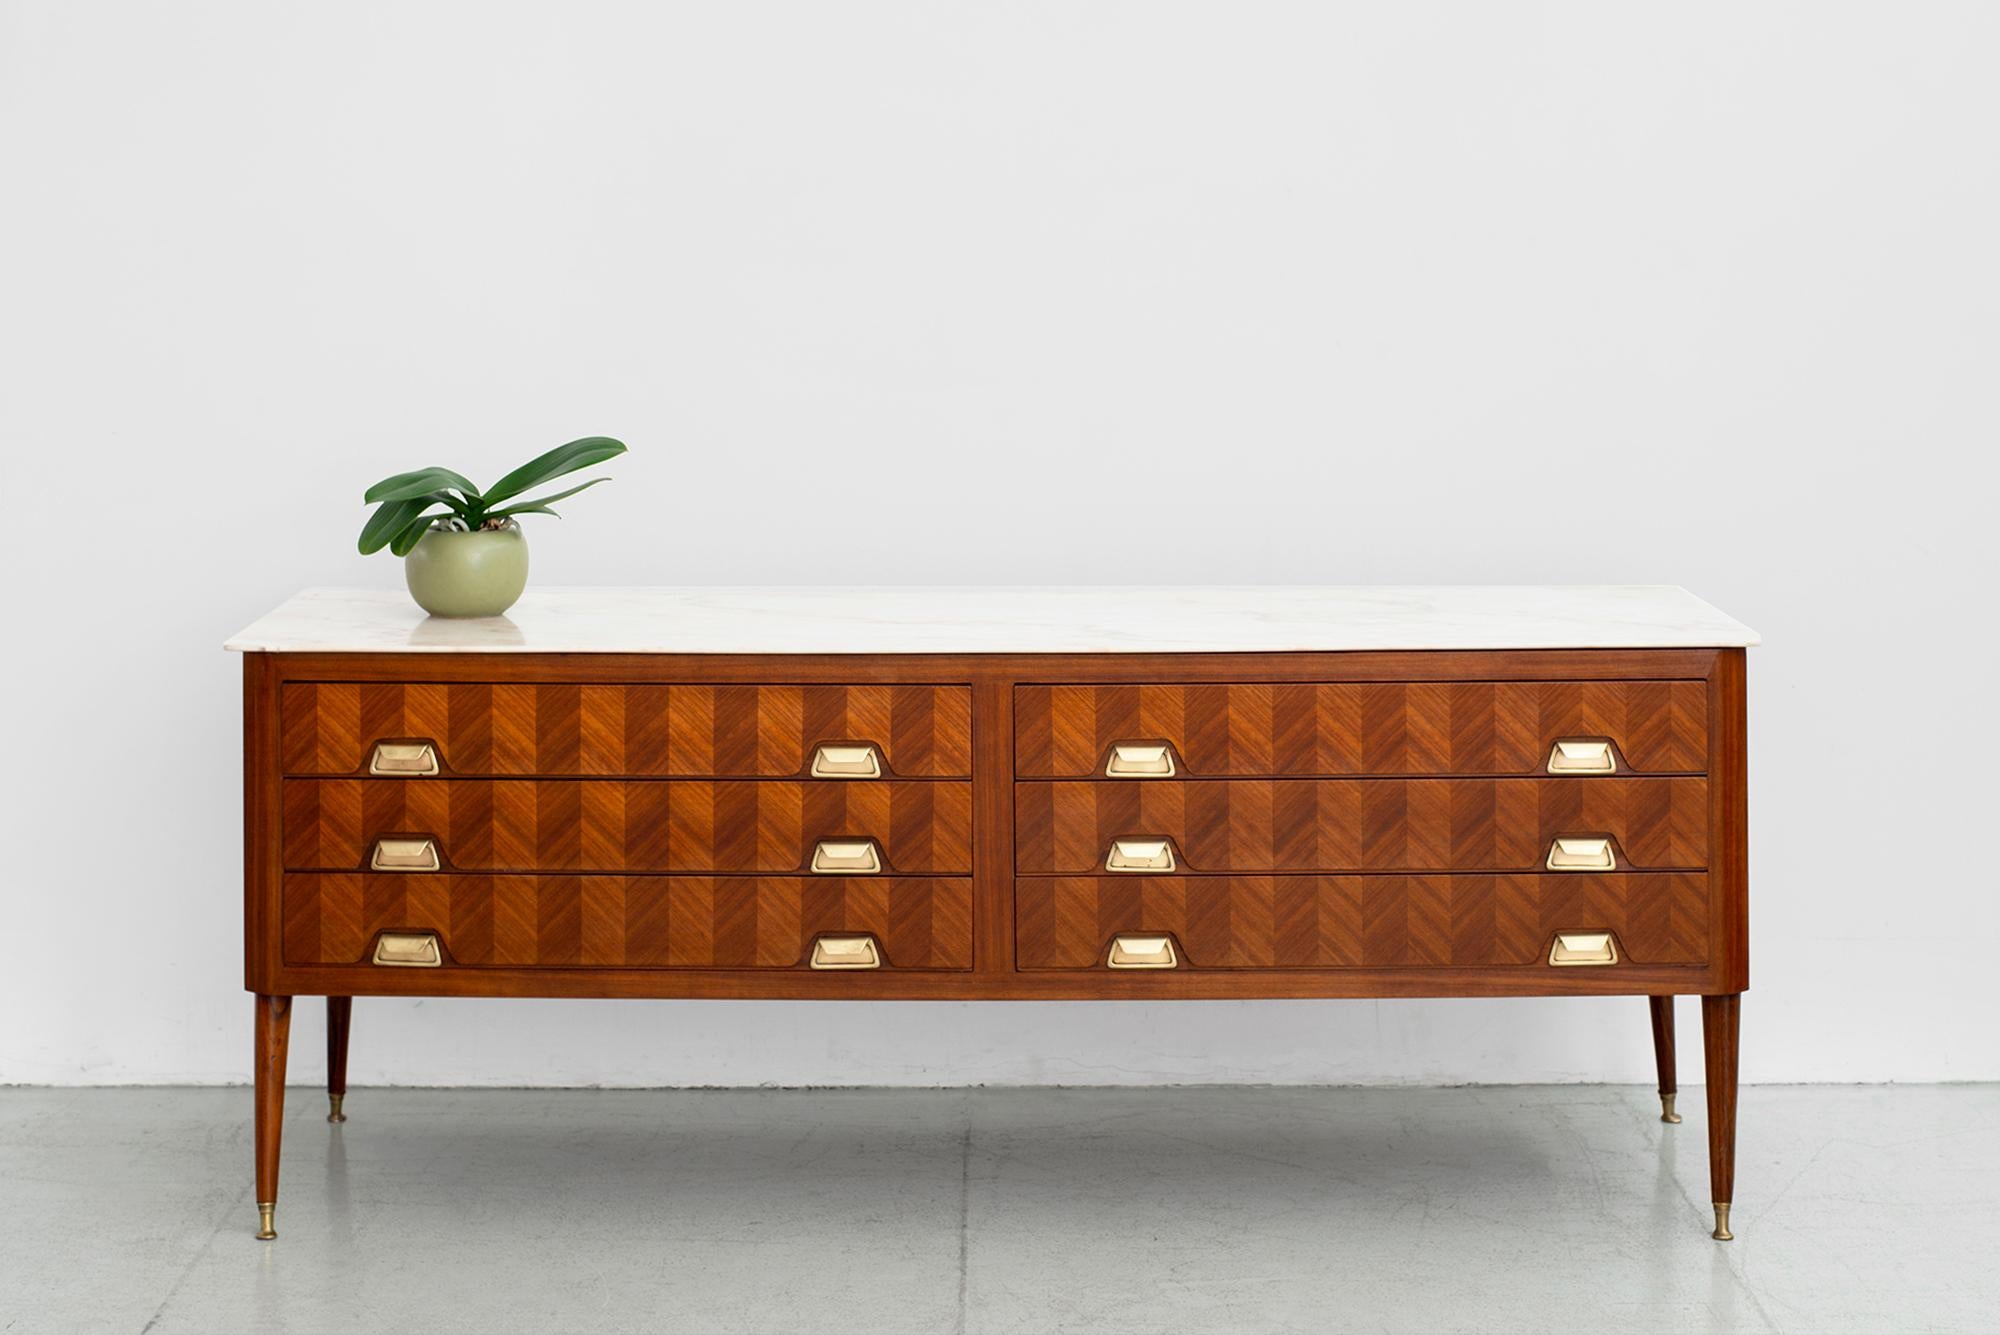 Gorgeous Italian mahogany sideboard with marquetry inlay wood in herringbone pattern. 
Marble top with beautiful grain.
Tapered legs with brass hardware and brass tipped legs.